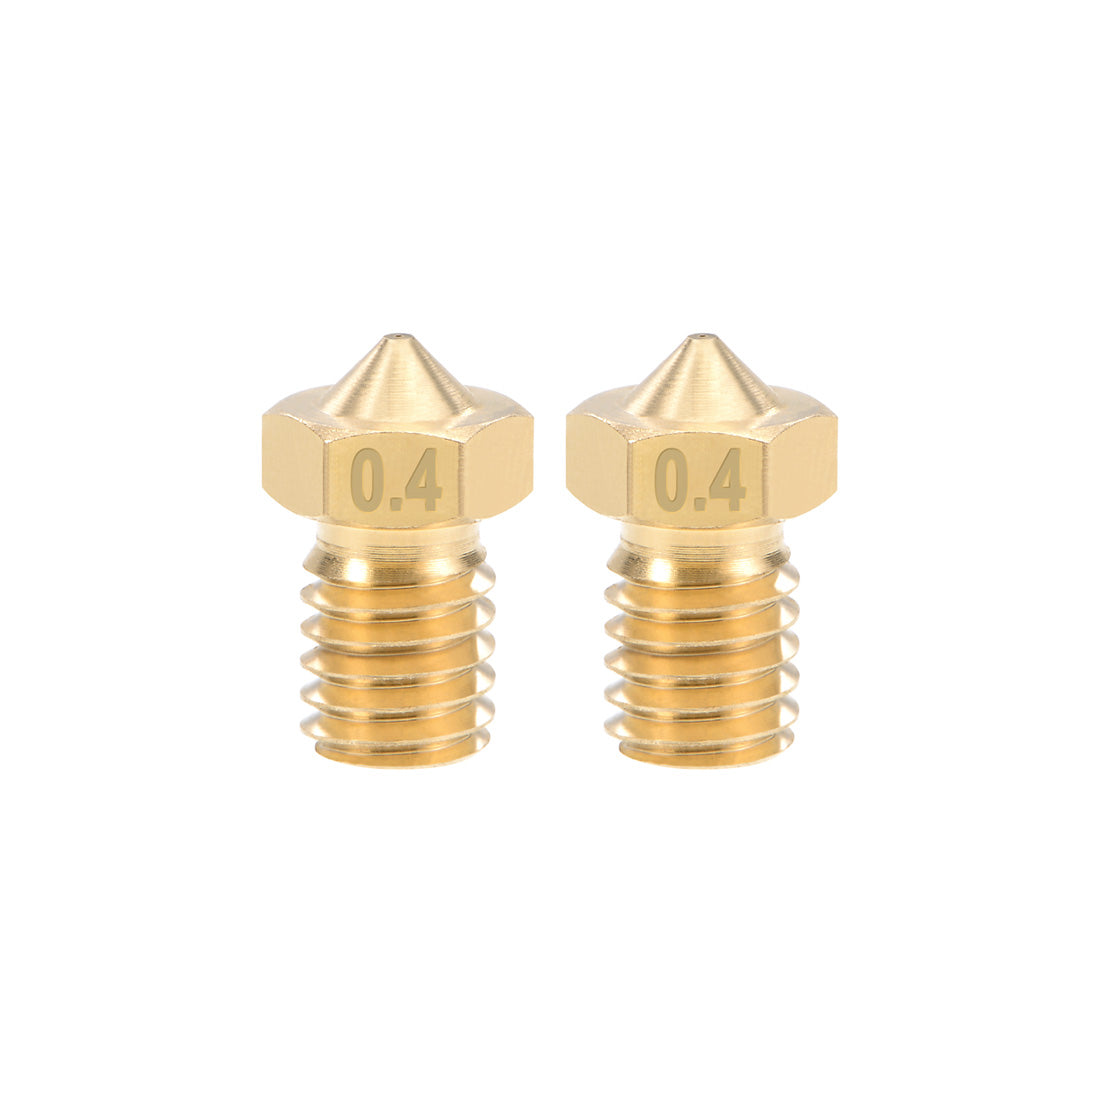 uxcell Uxcell 0.4mm 3D Printer Nozzle Head M6 Thread Replacement for V5 V6 3mm Extruder Print, Brass 2pcs